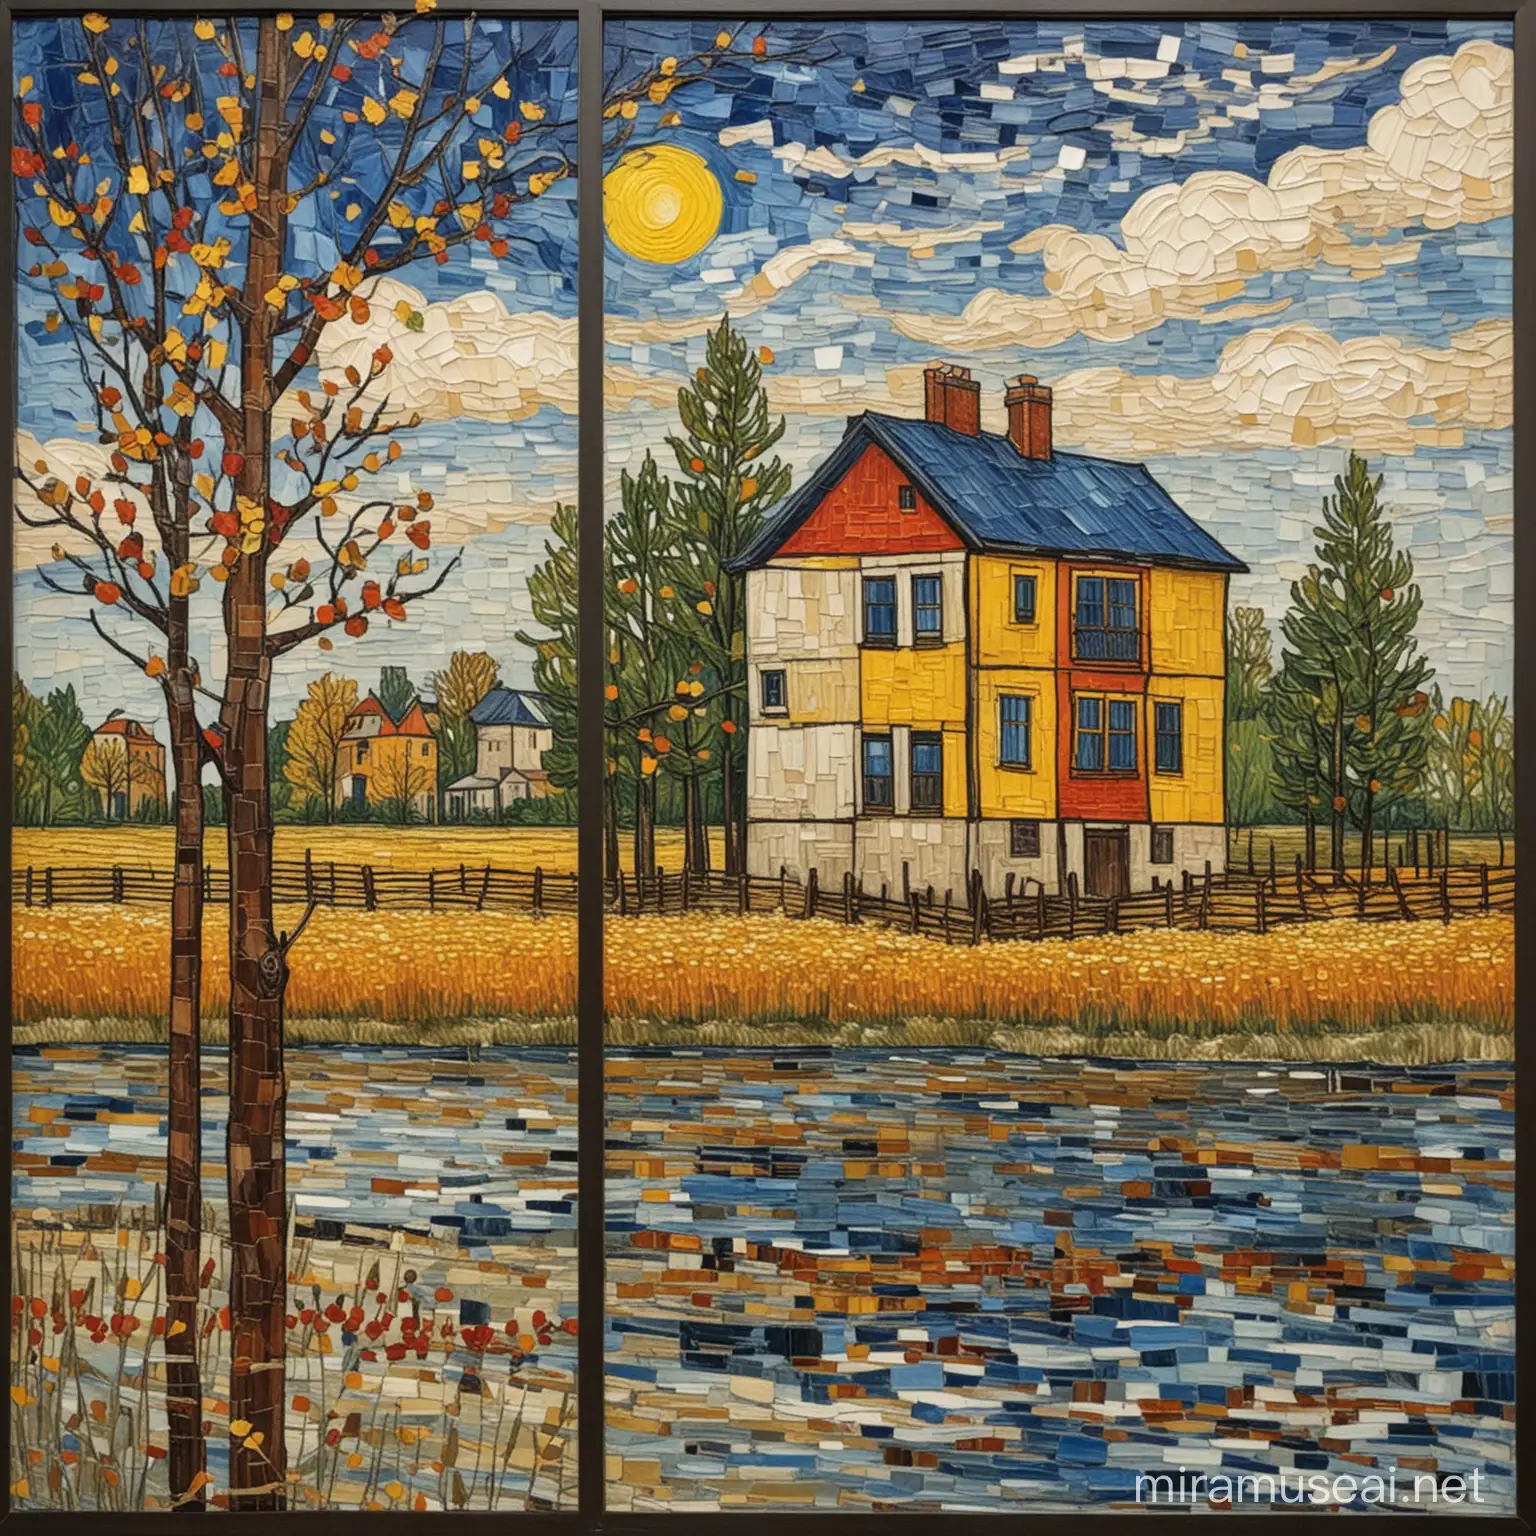 Combining the style of Van Gogh and Mondrian